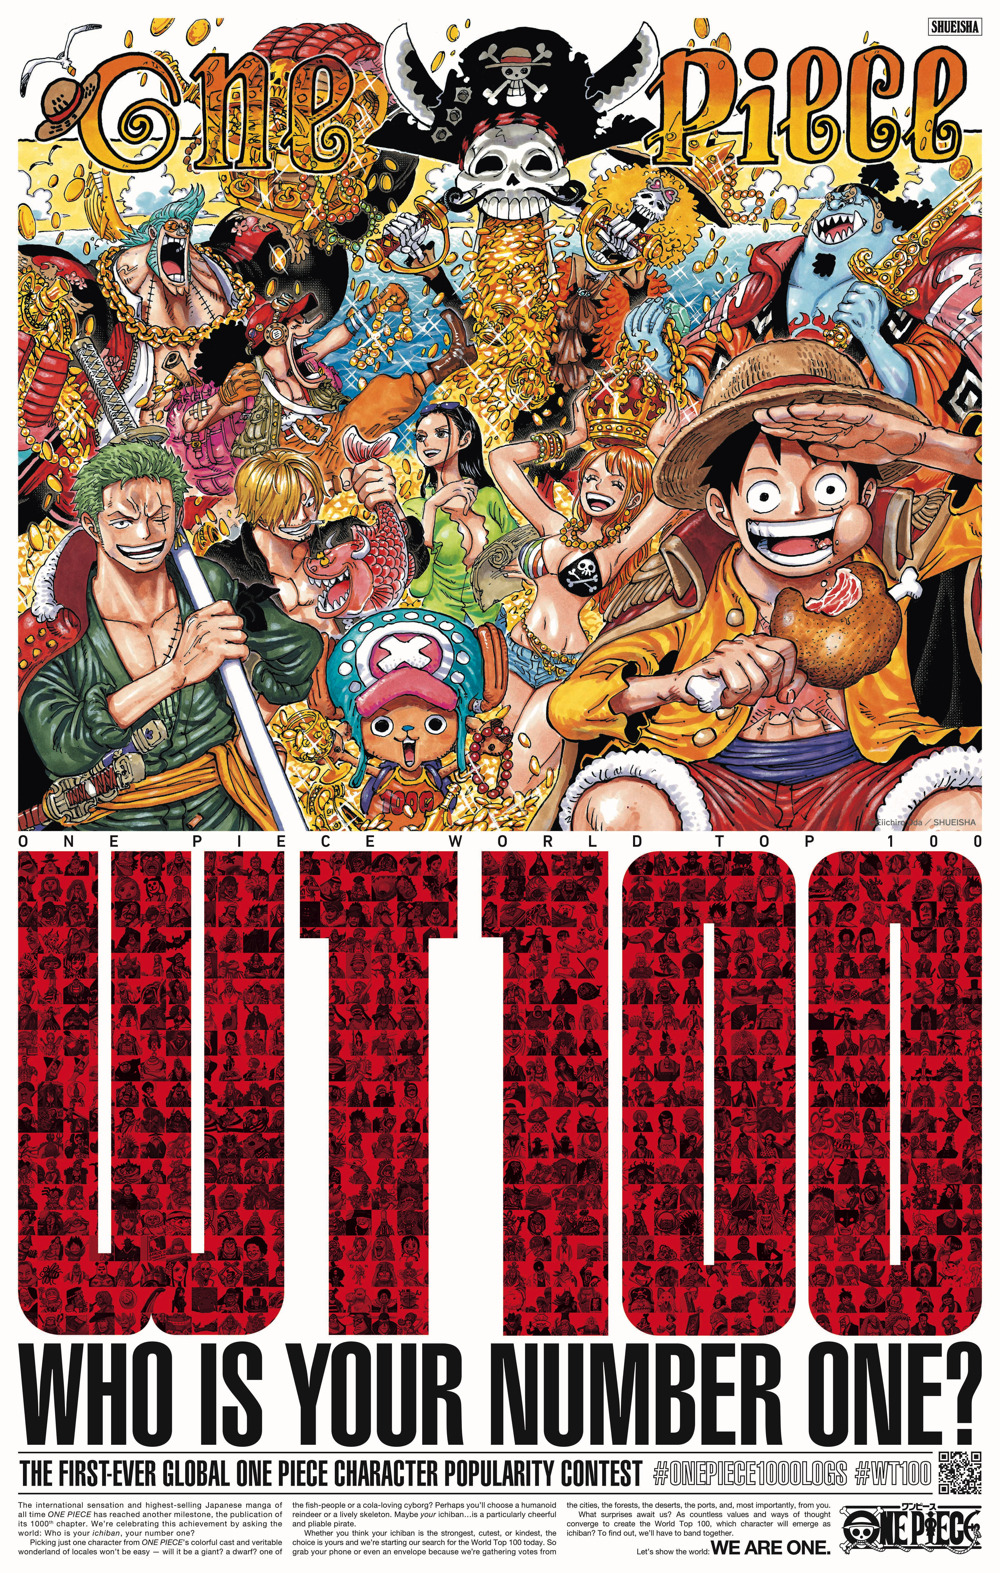 One Piece 1000話到達 記念pv公開や全世界で人気キャラ投票も Rbb Today